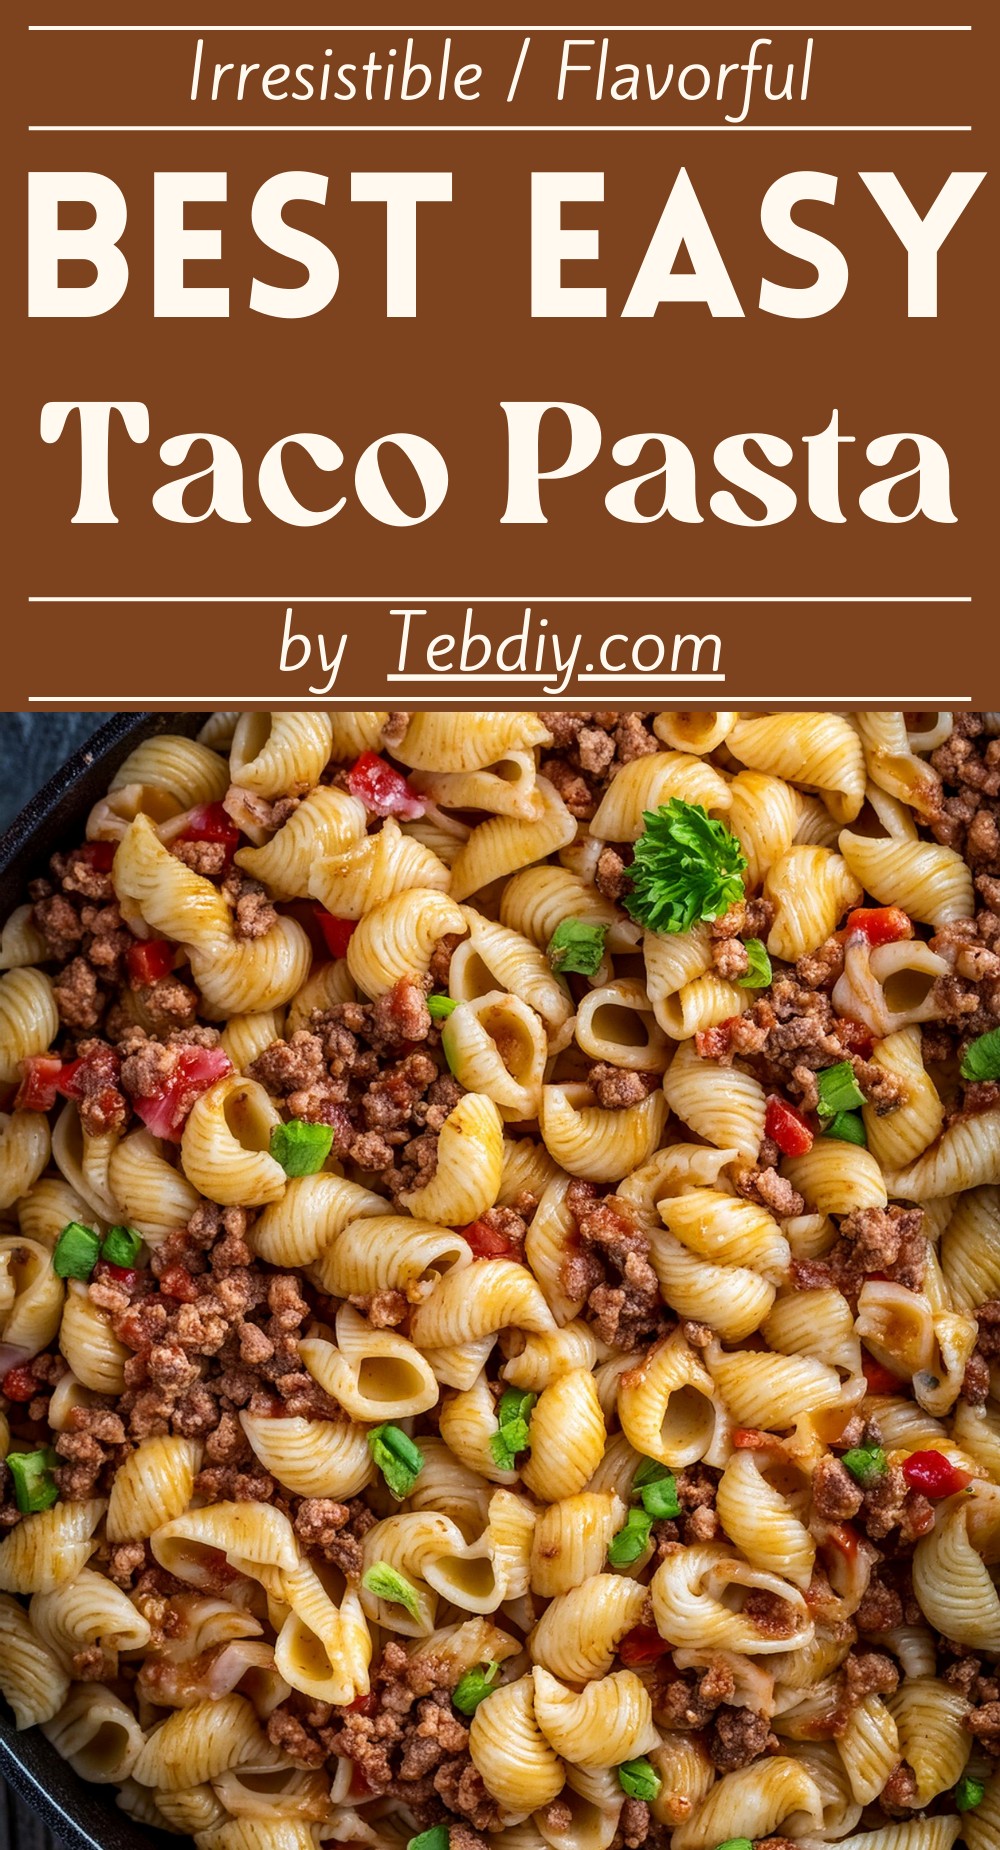 Best Beef Taco Pasta Recipe To Be A Part Of Any Meal - Teb DIY